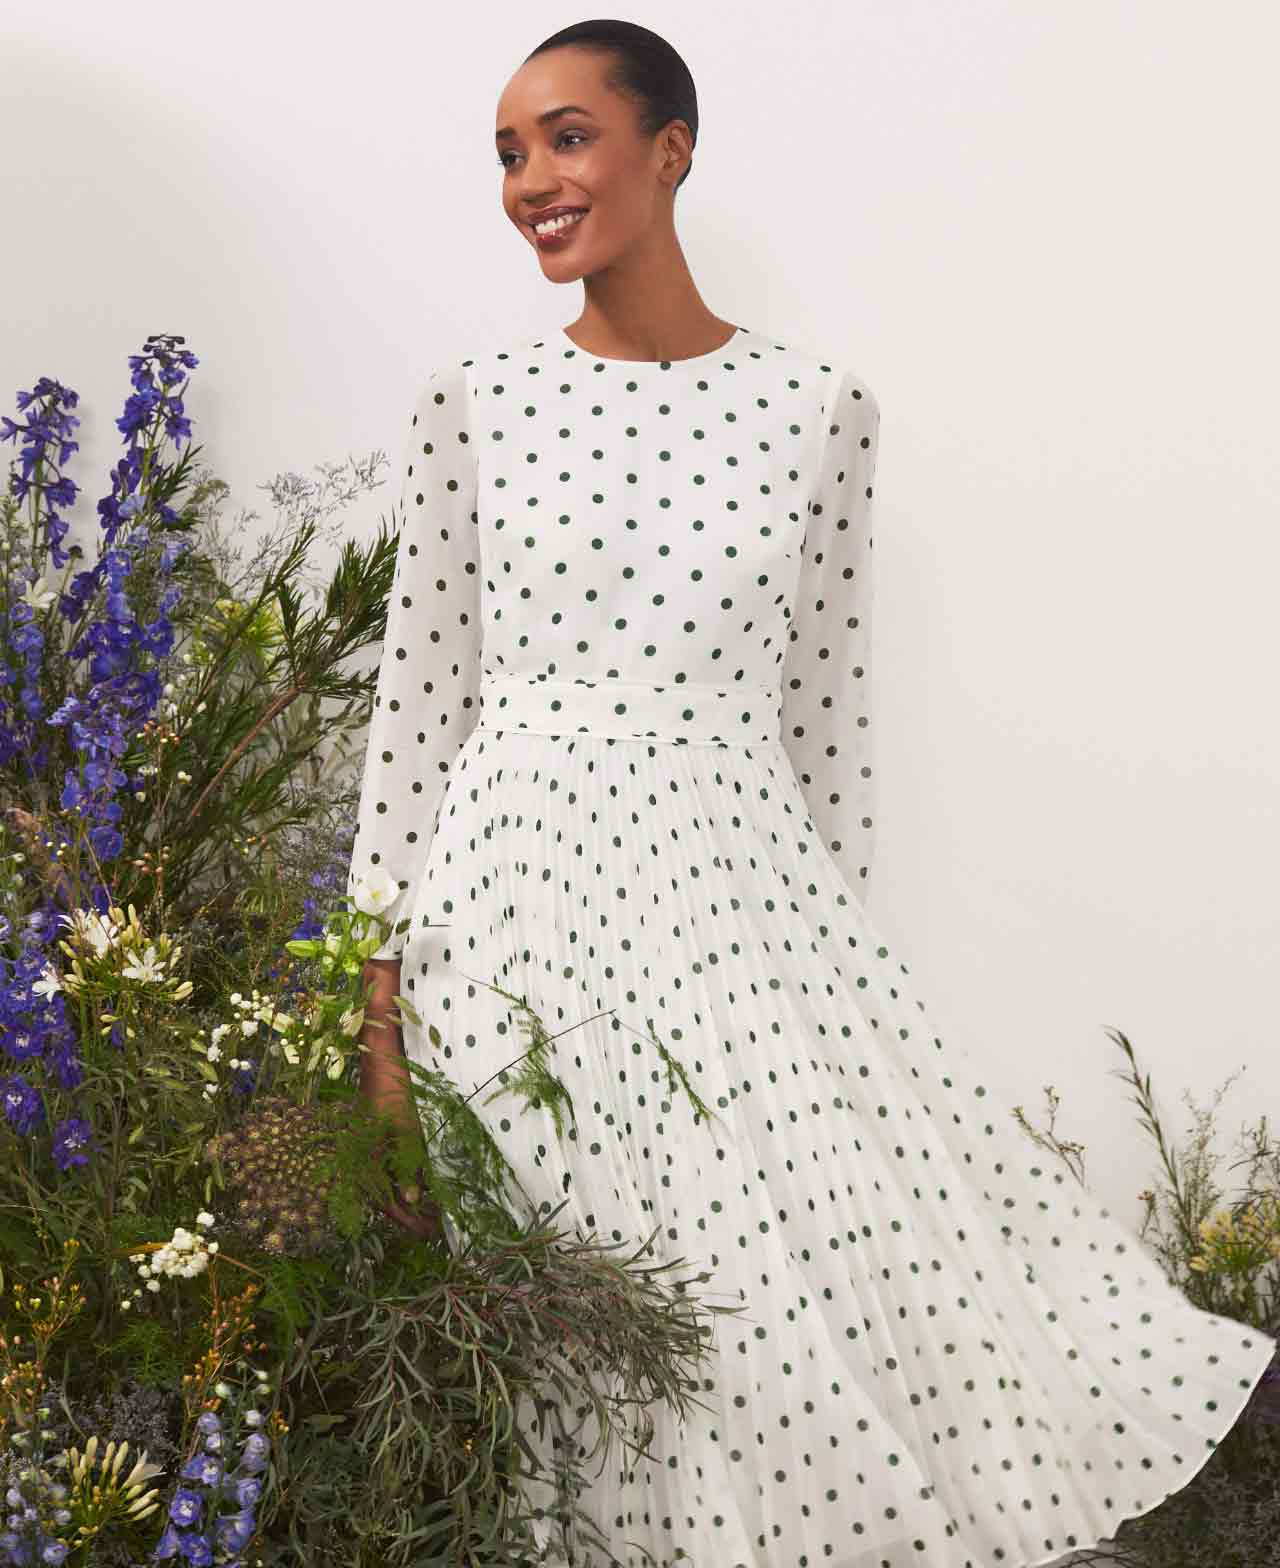 Hobbs stands next to a floral display wearing a polka dot fit and flare dress.